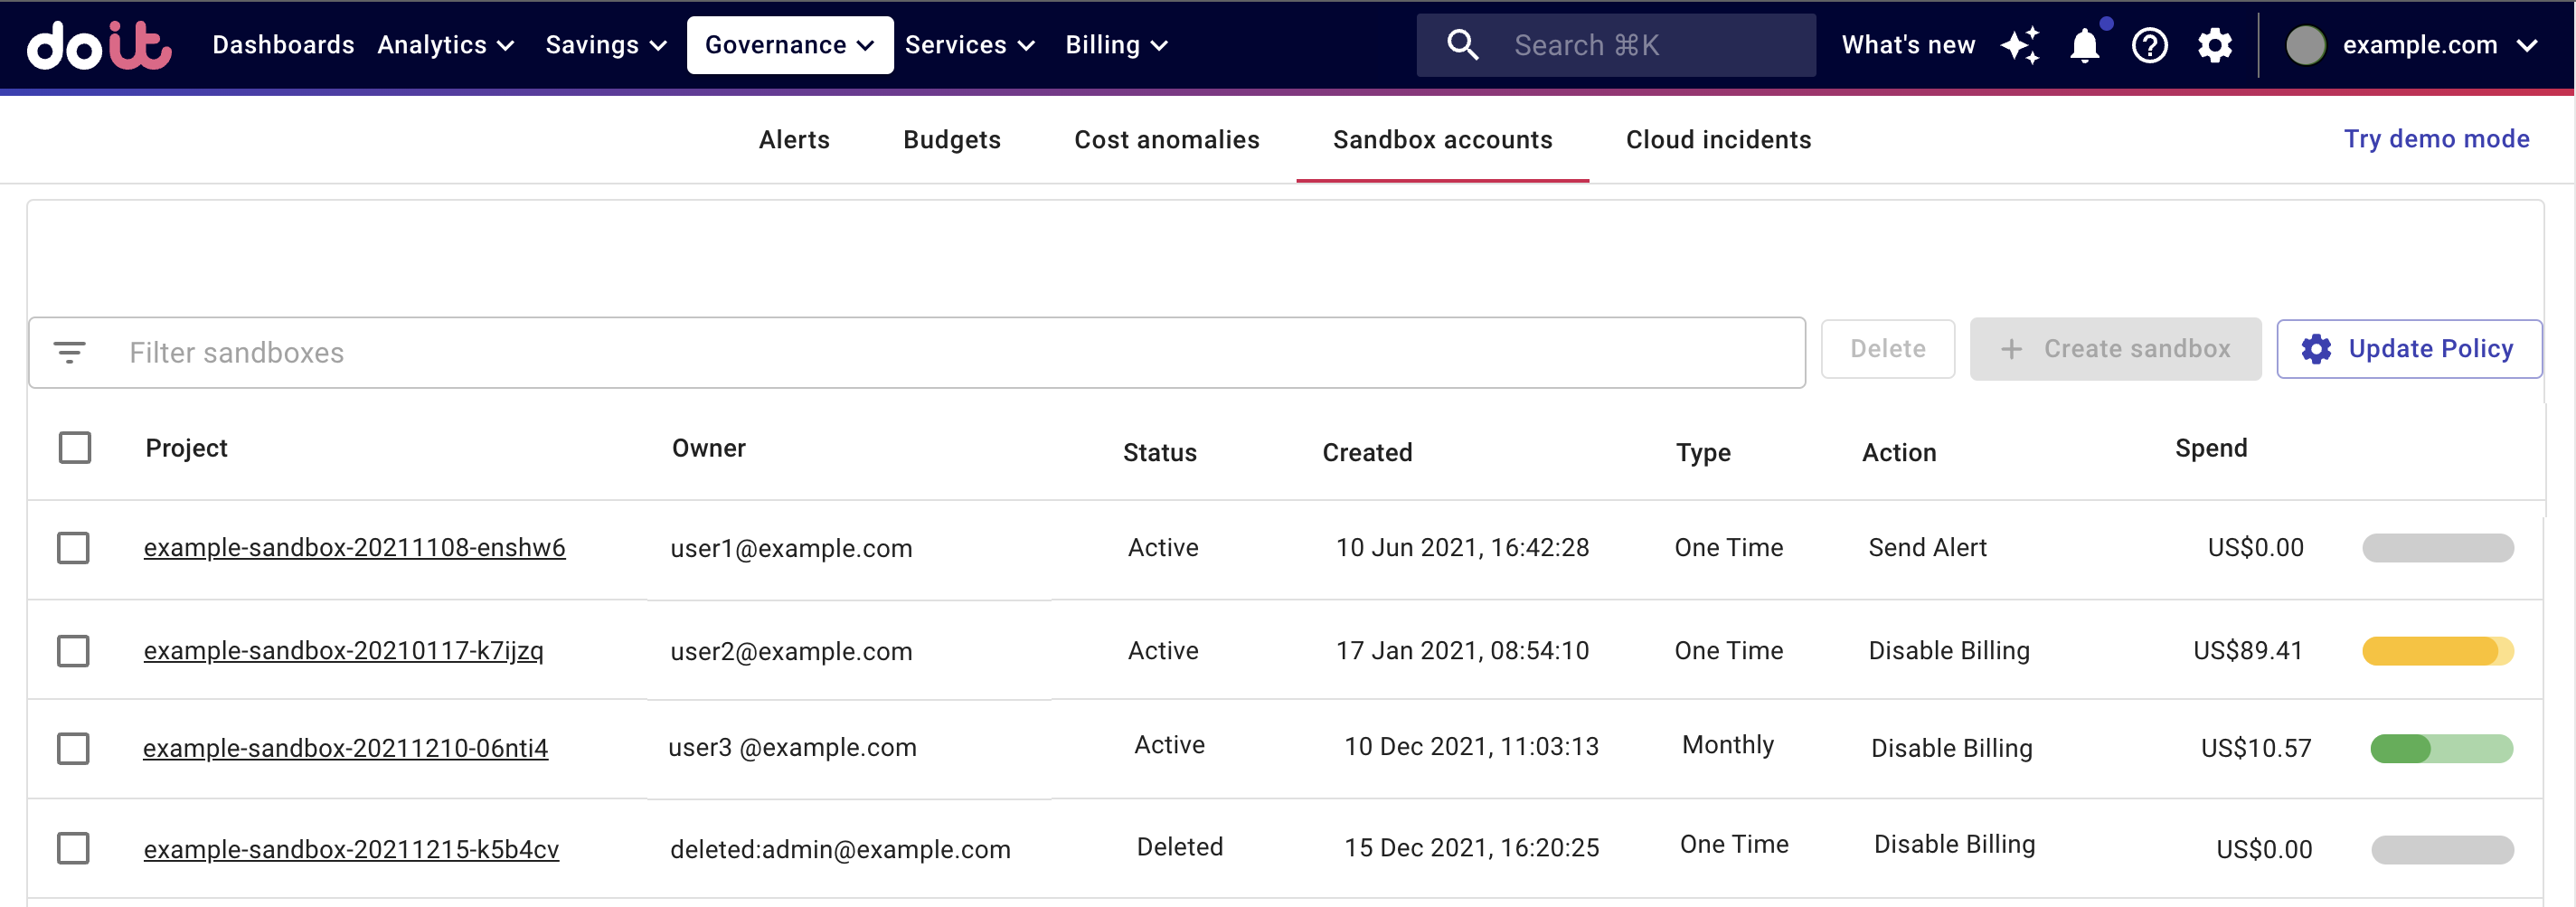 Sandbox accounts screen with multiple projects